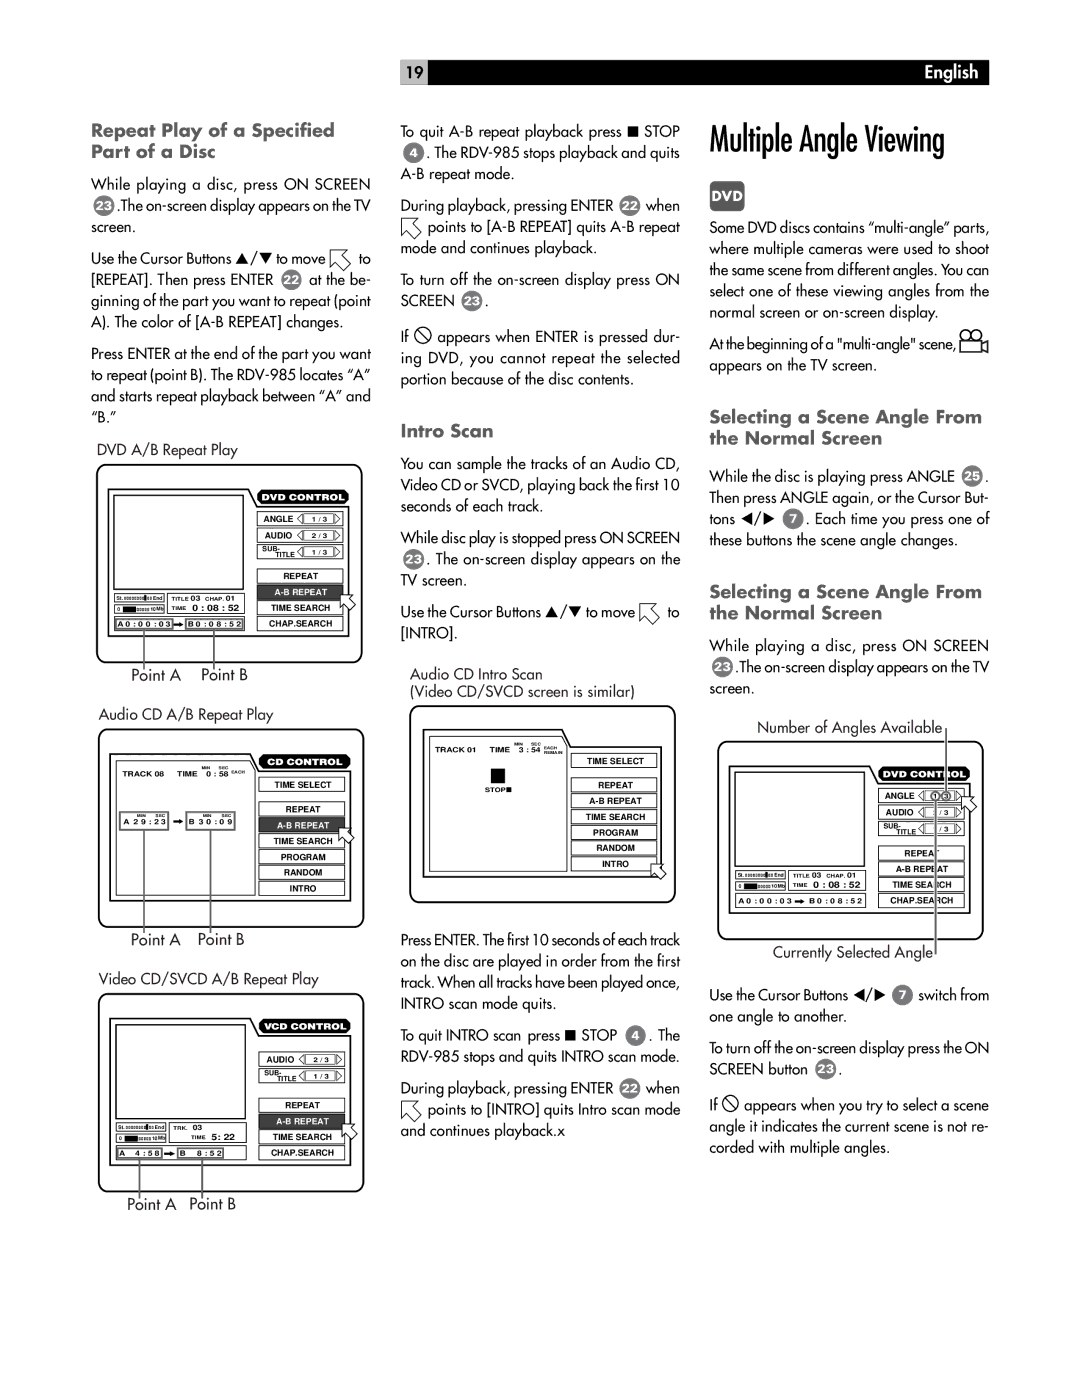 Rotel RDV-985 owner manual Multiple Angle Viewing, Repeat Play of a Specified Part of a Disc, Intro Scan 